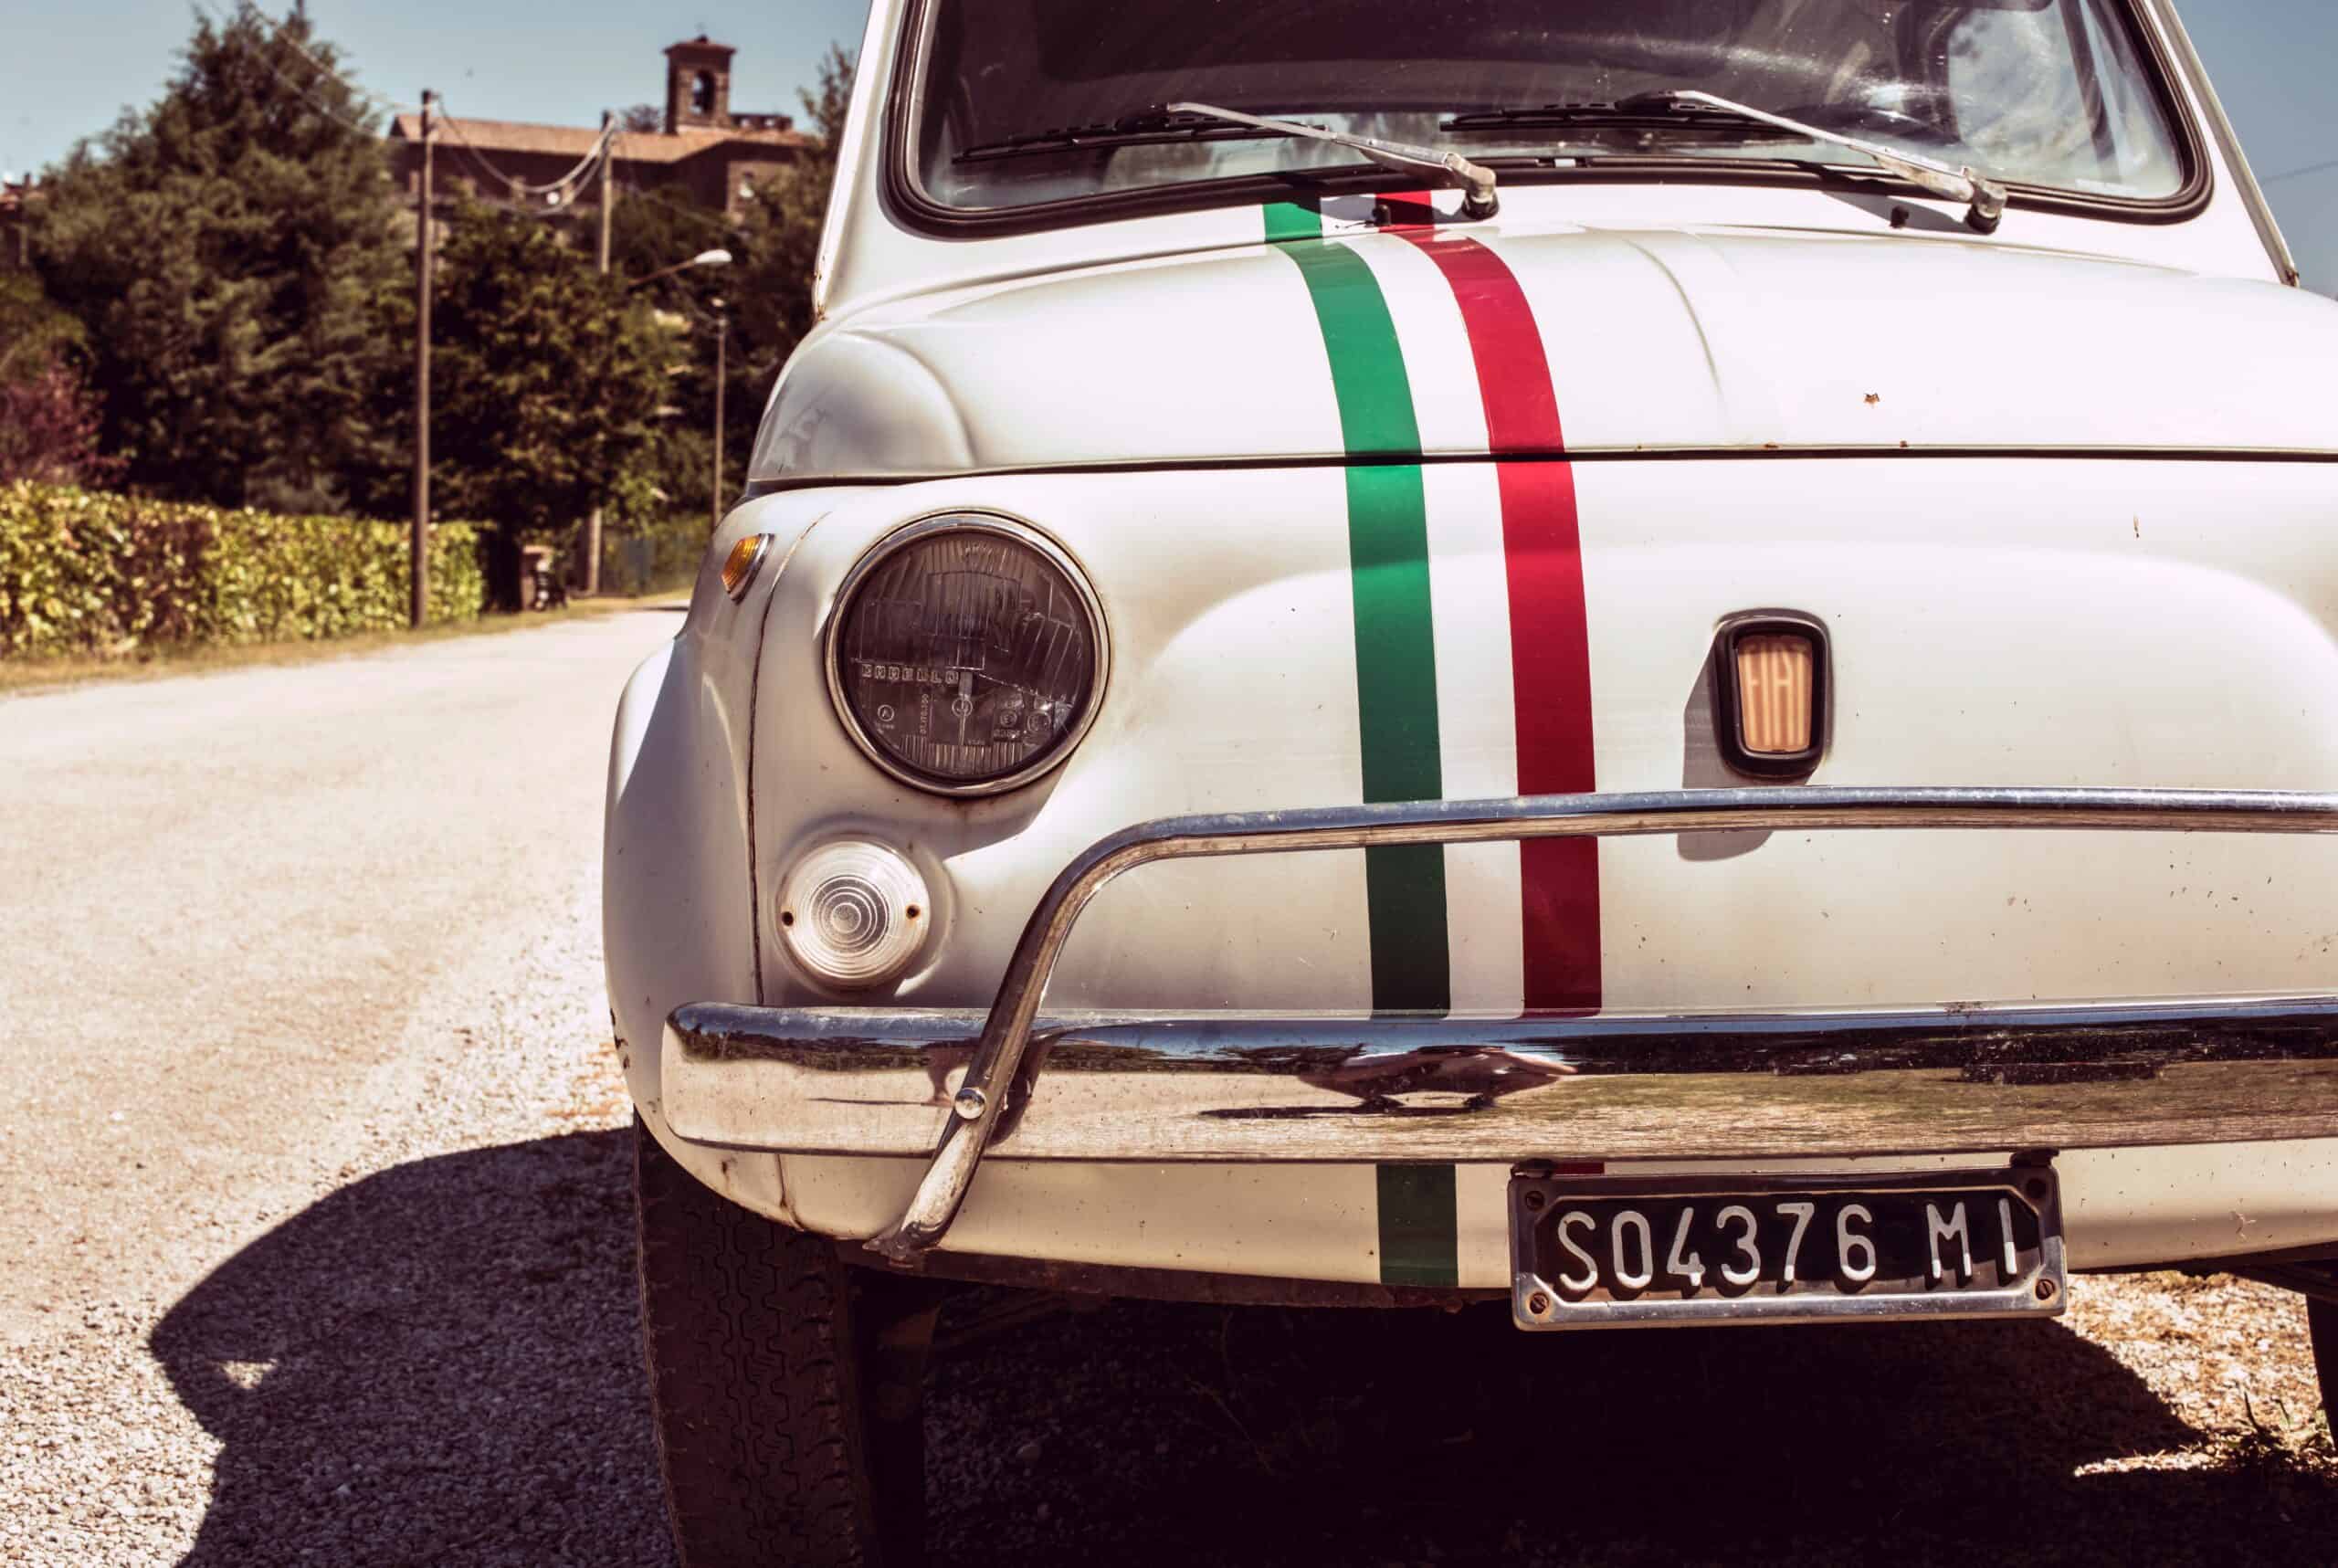 Images shows original, white Fiat 500 with Italian flag decal